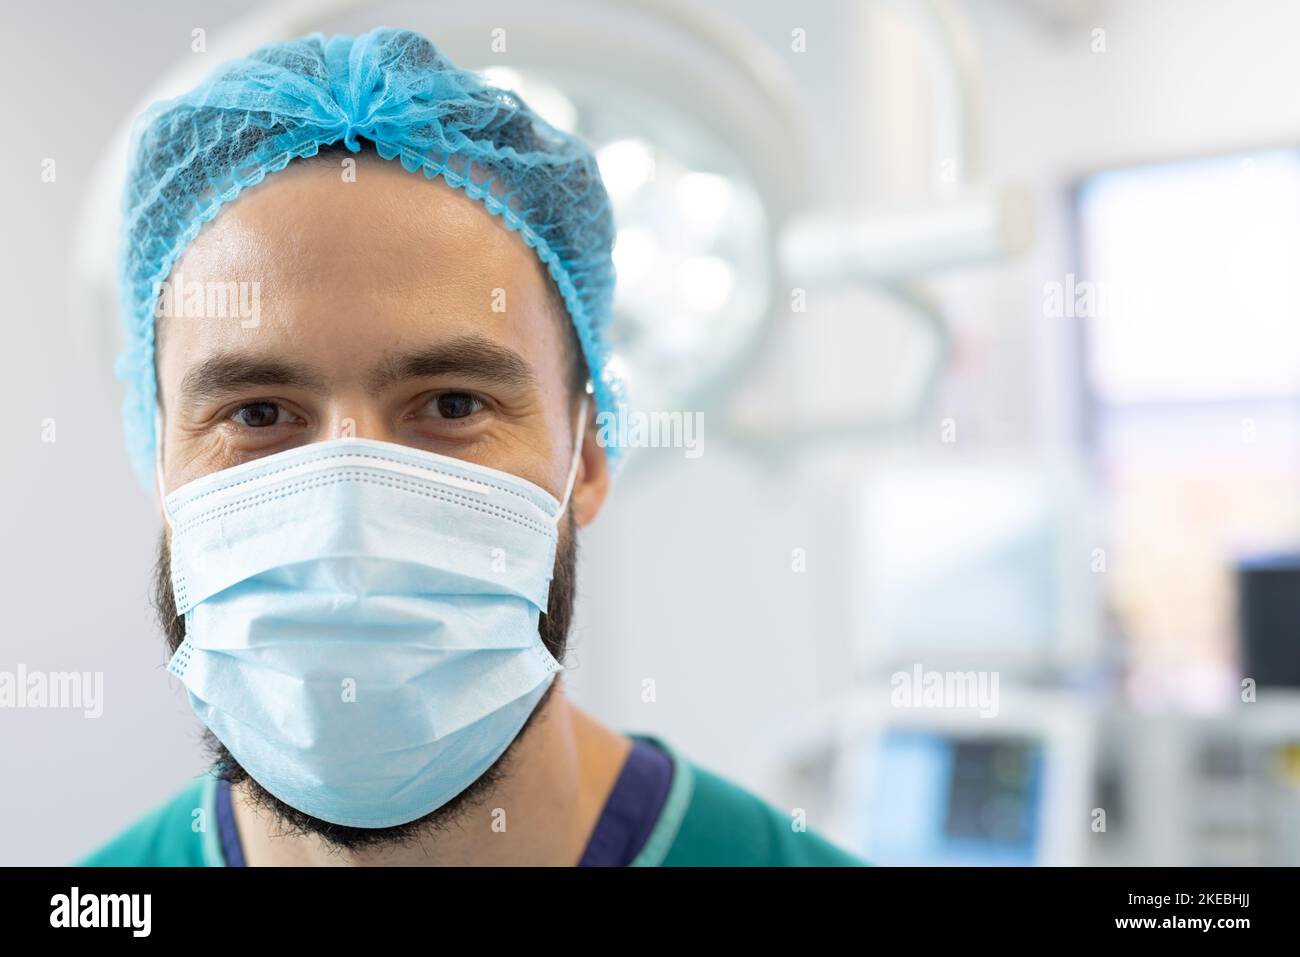 Portrait of smiling caucasian male surgeon in surgical mask and cap in operating theatre, copy space. Hospital, medical and healthcare services. Stock Photo